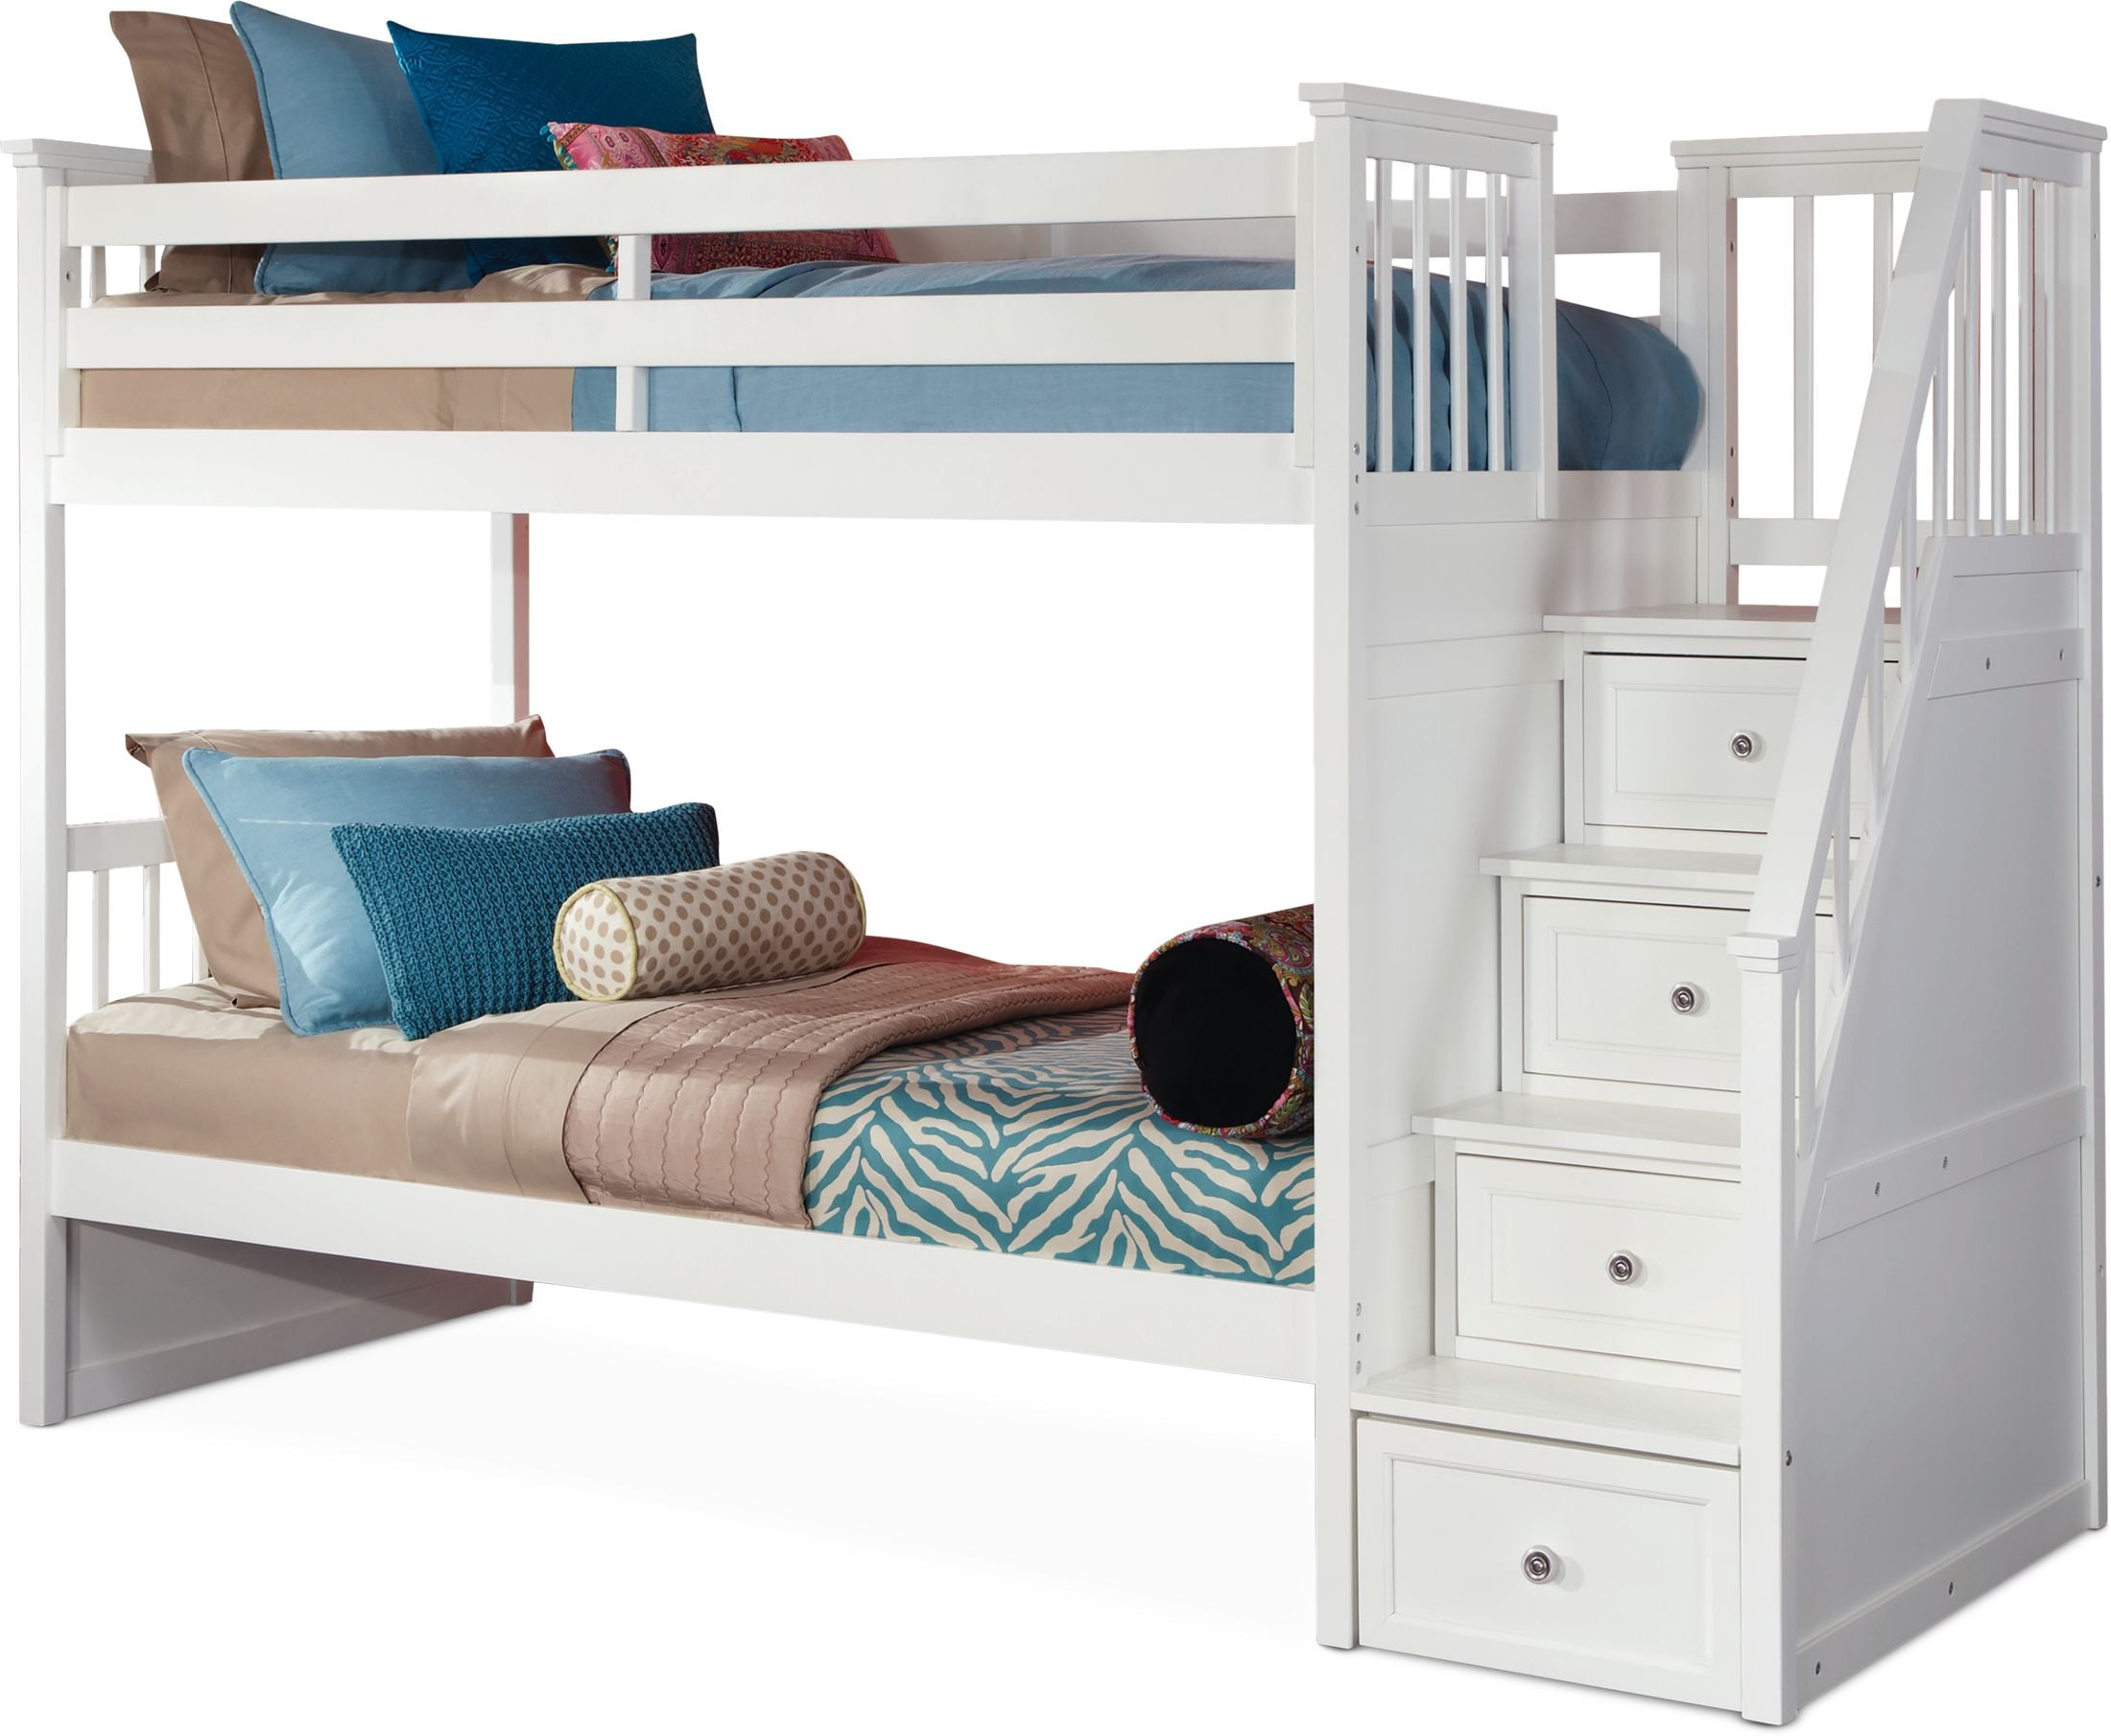 Value City Furniture Childrens Bedroom Sets Cheaper Than Retail Price Buy Clothing Accessories And Lifestyle Products For Women Men